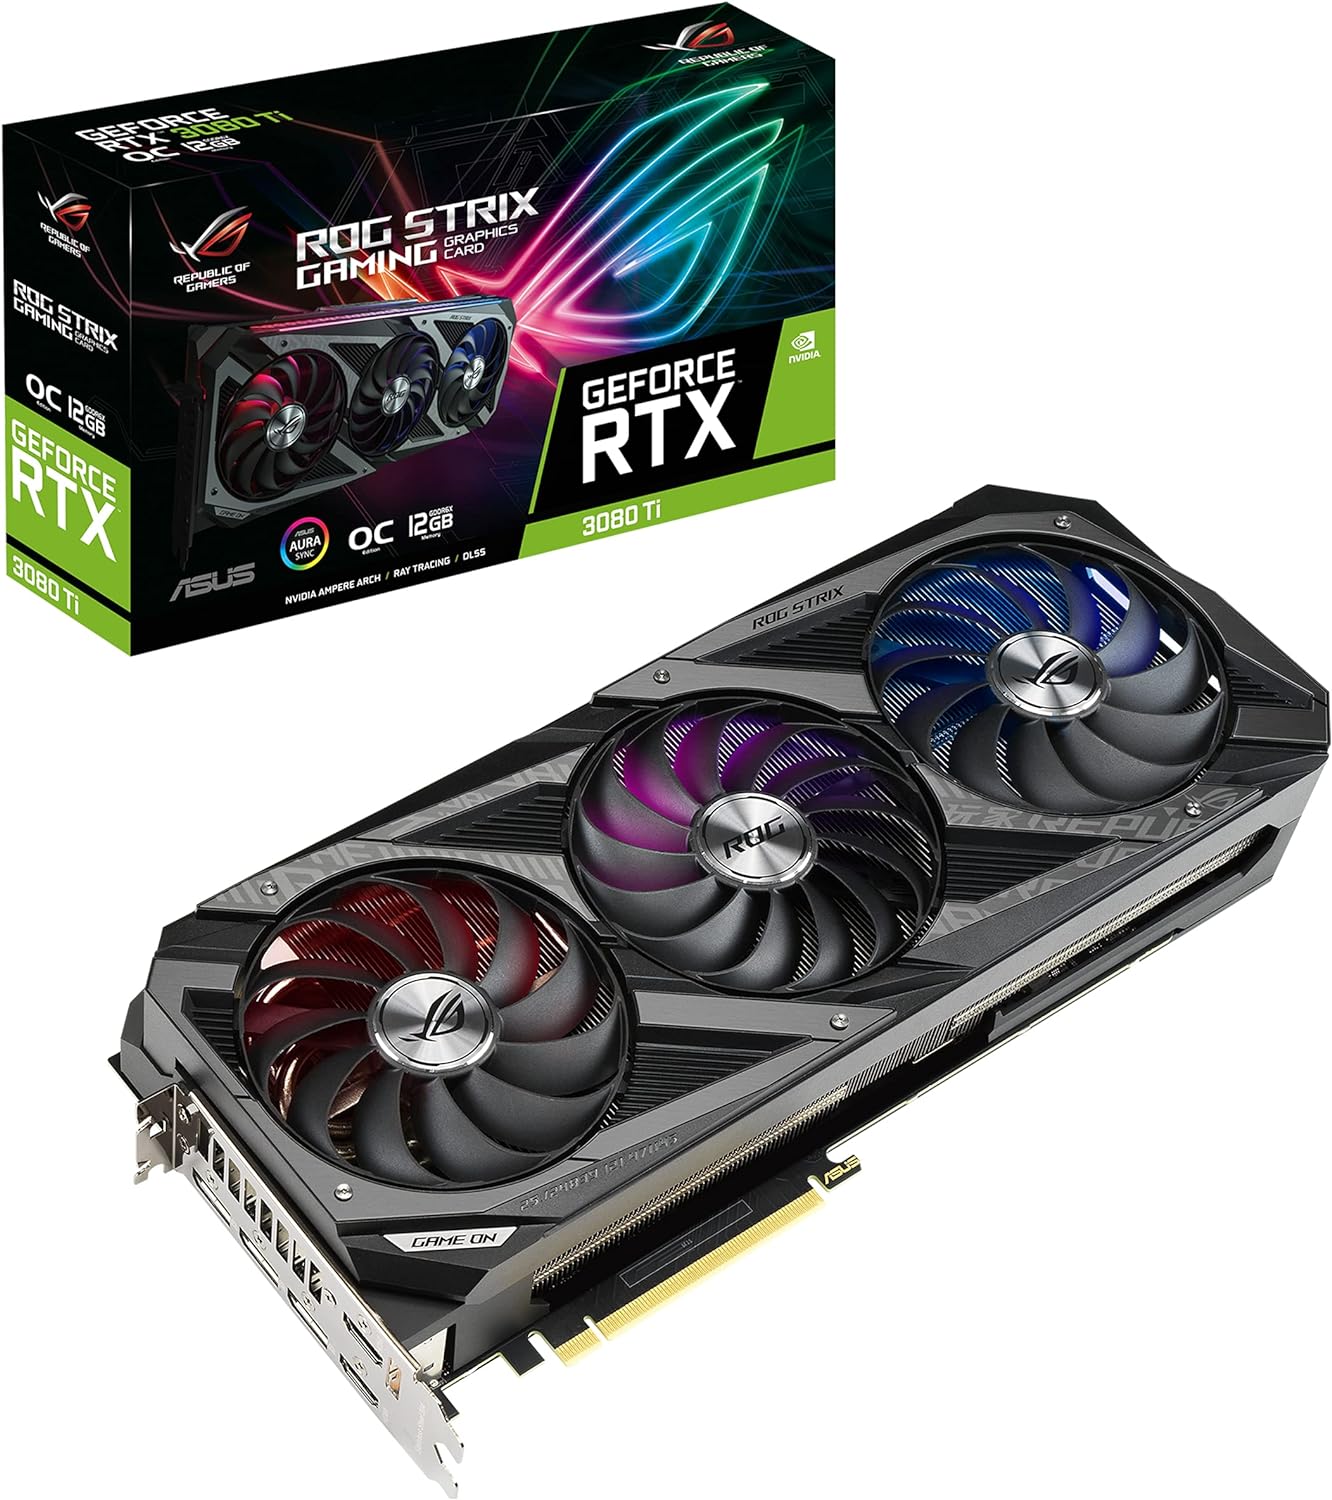 ASUS ROG Strix RTX 3080 Ti OC Gaming Card: Powerful GPU with 12GB GDDR6X for ultimate gaming performance. 0195553169776